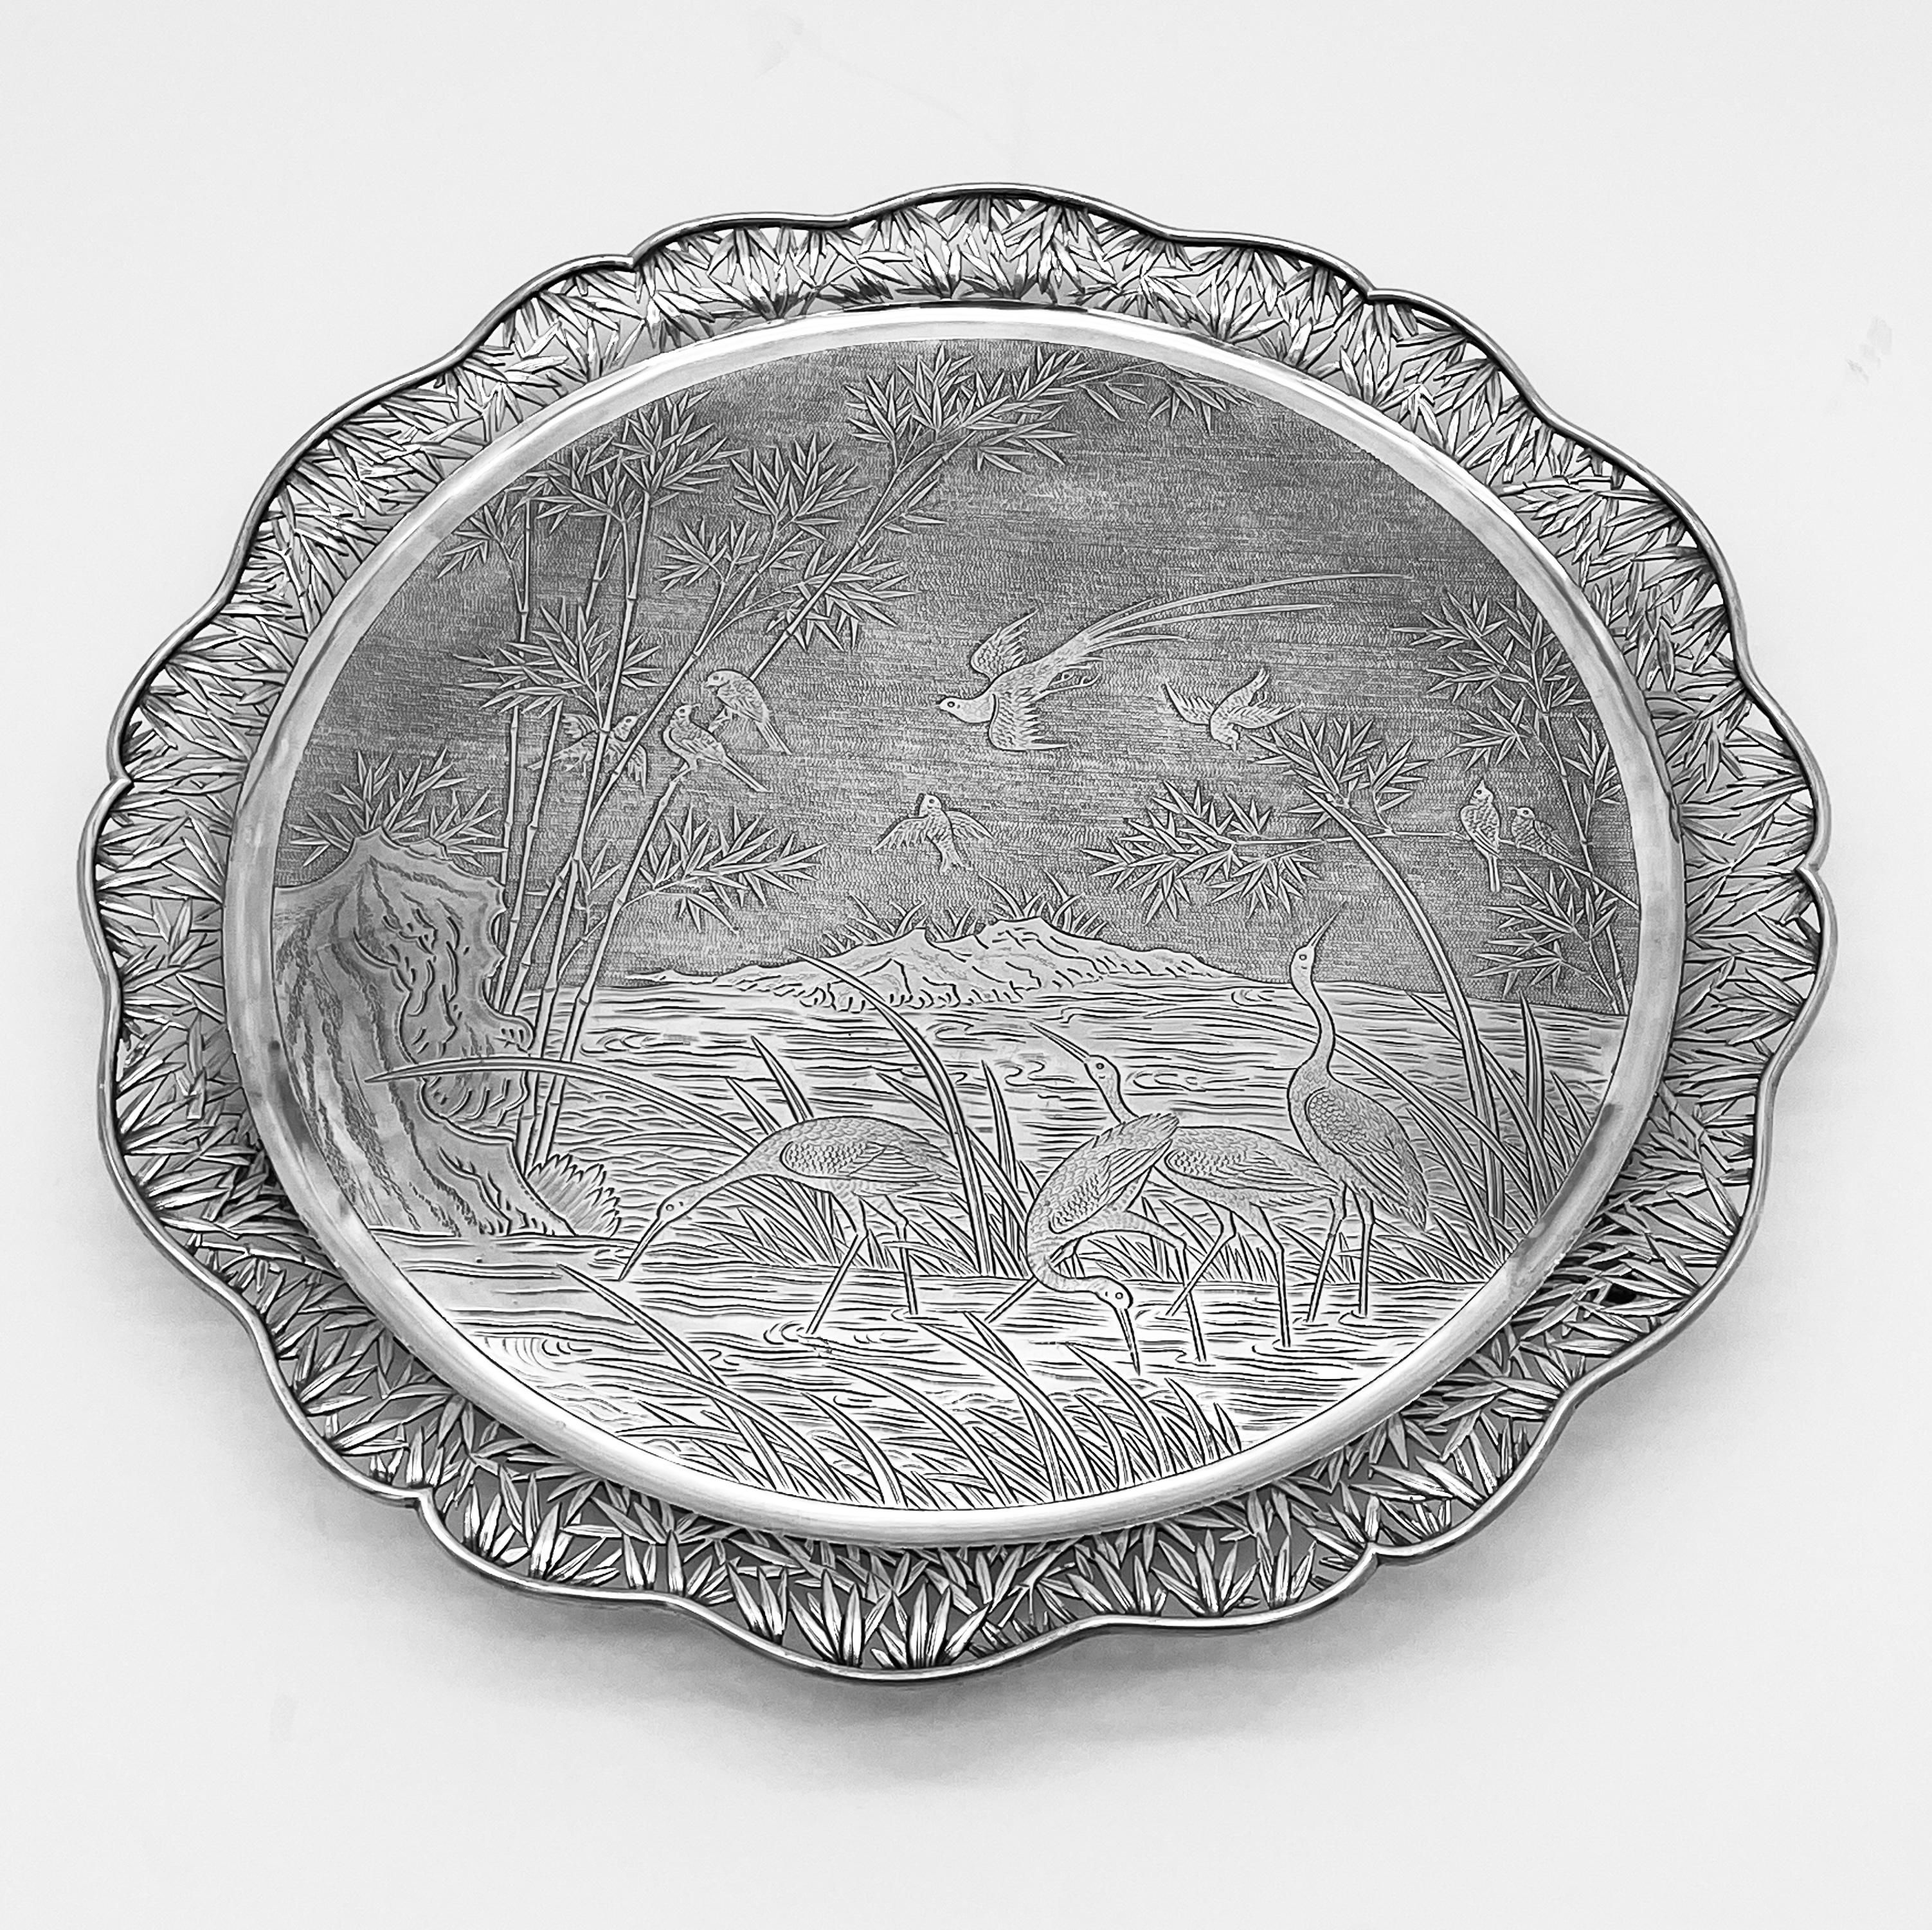 An exquisite Chinese Export Silver Salver embossed and chased with a captivating scene of graceful egrets wading in the pond, accompanied by the elegant flight of Chrysolophus (a type of pheasant) above, surrounded by bamboos and stones. The